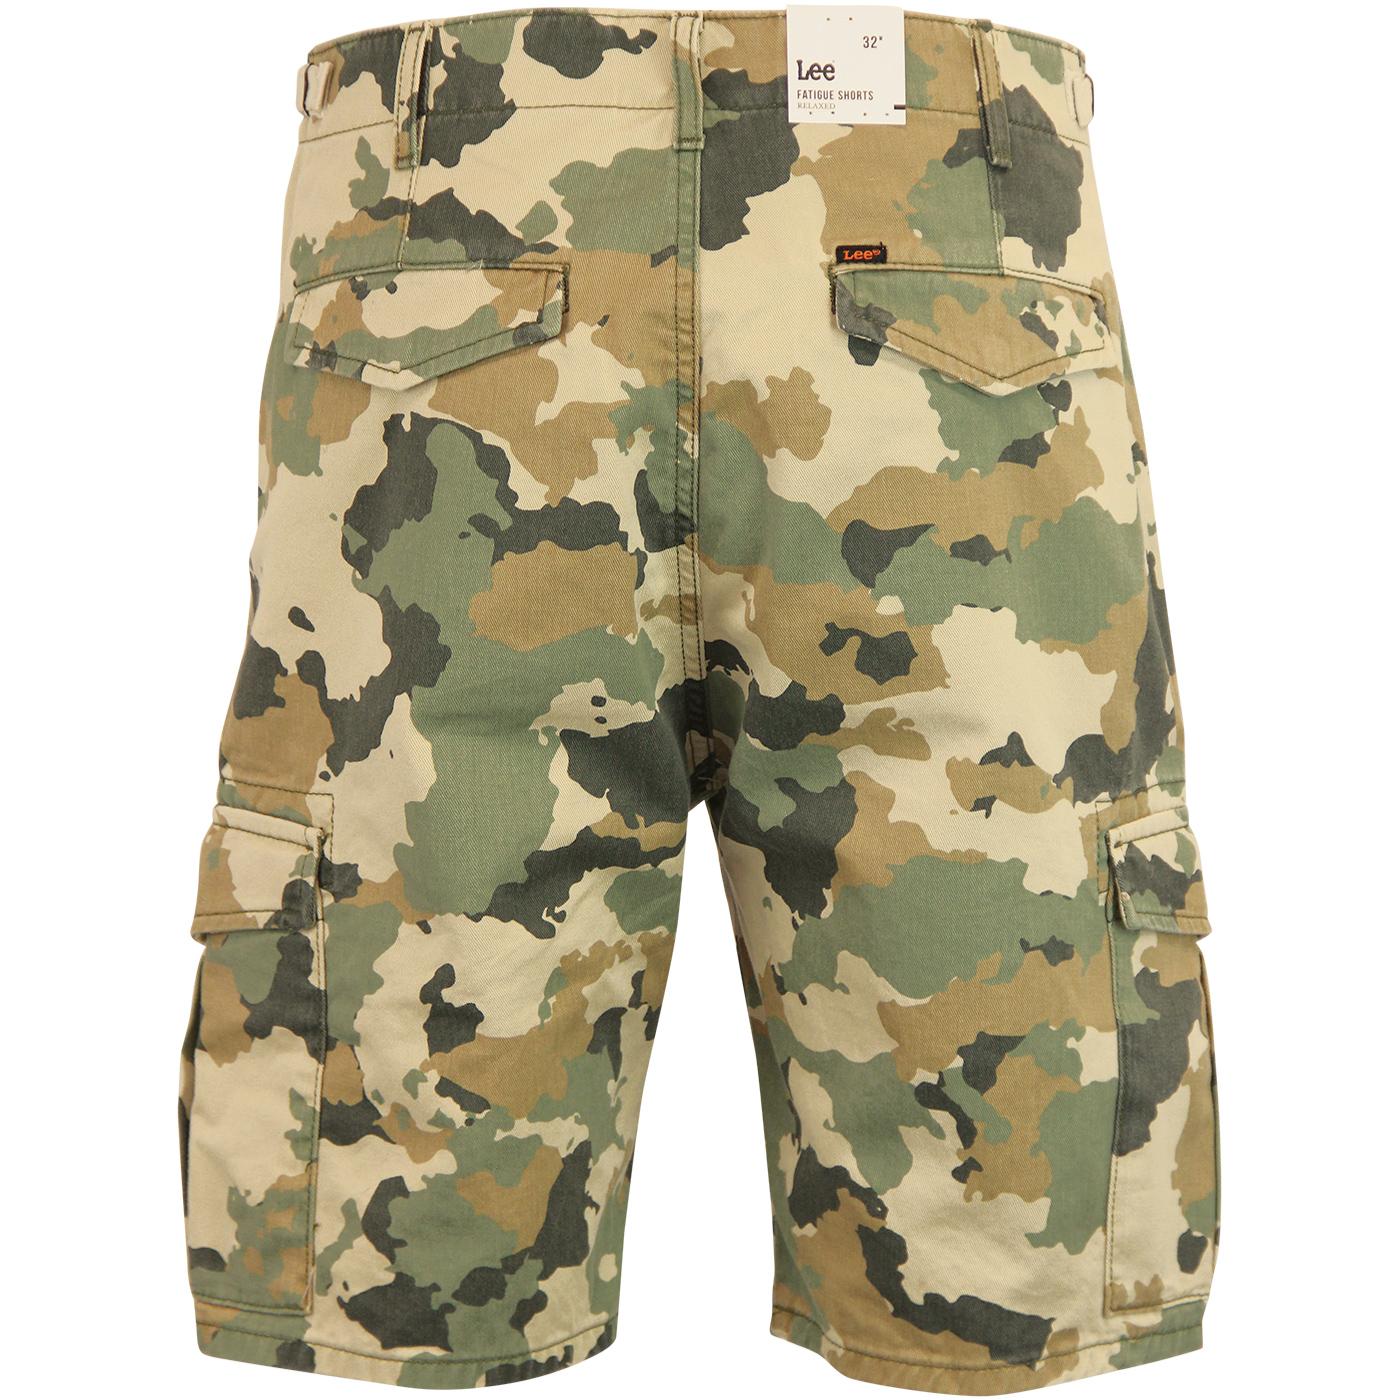 LEE JEANS Men's Retro Military Fatigue Shorts in Camouflage